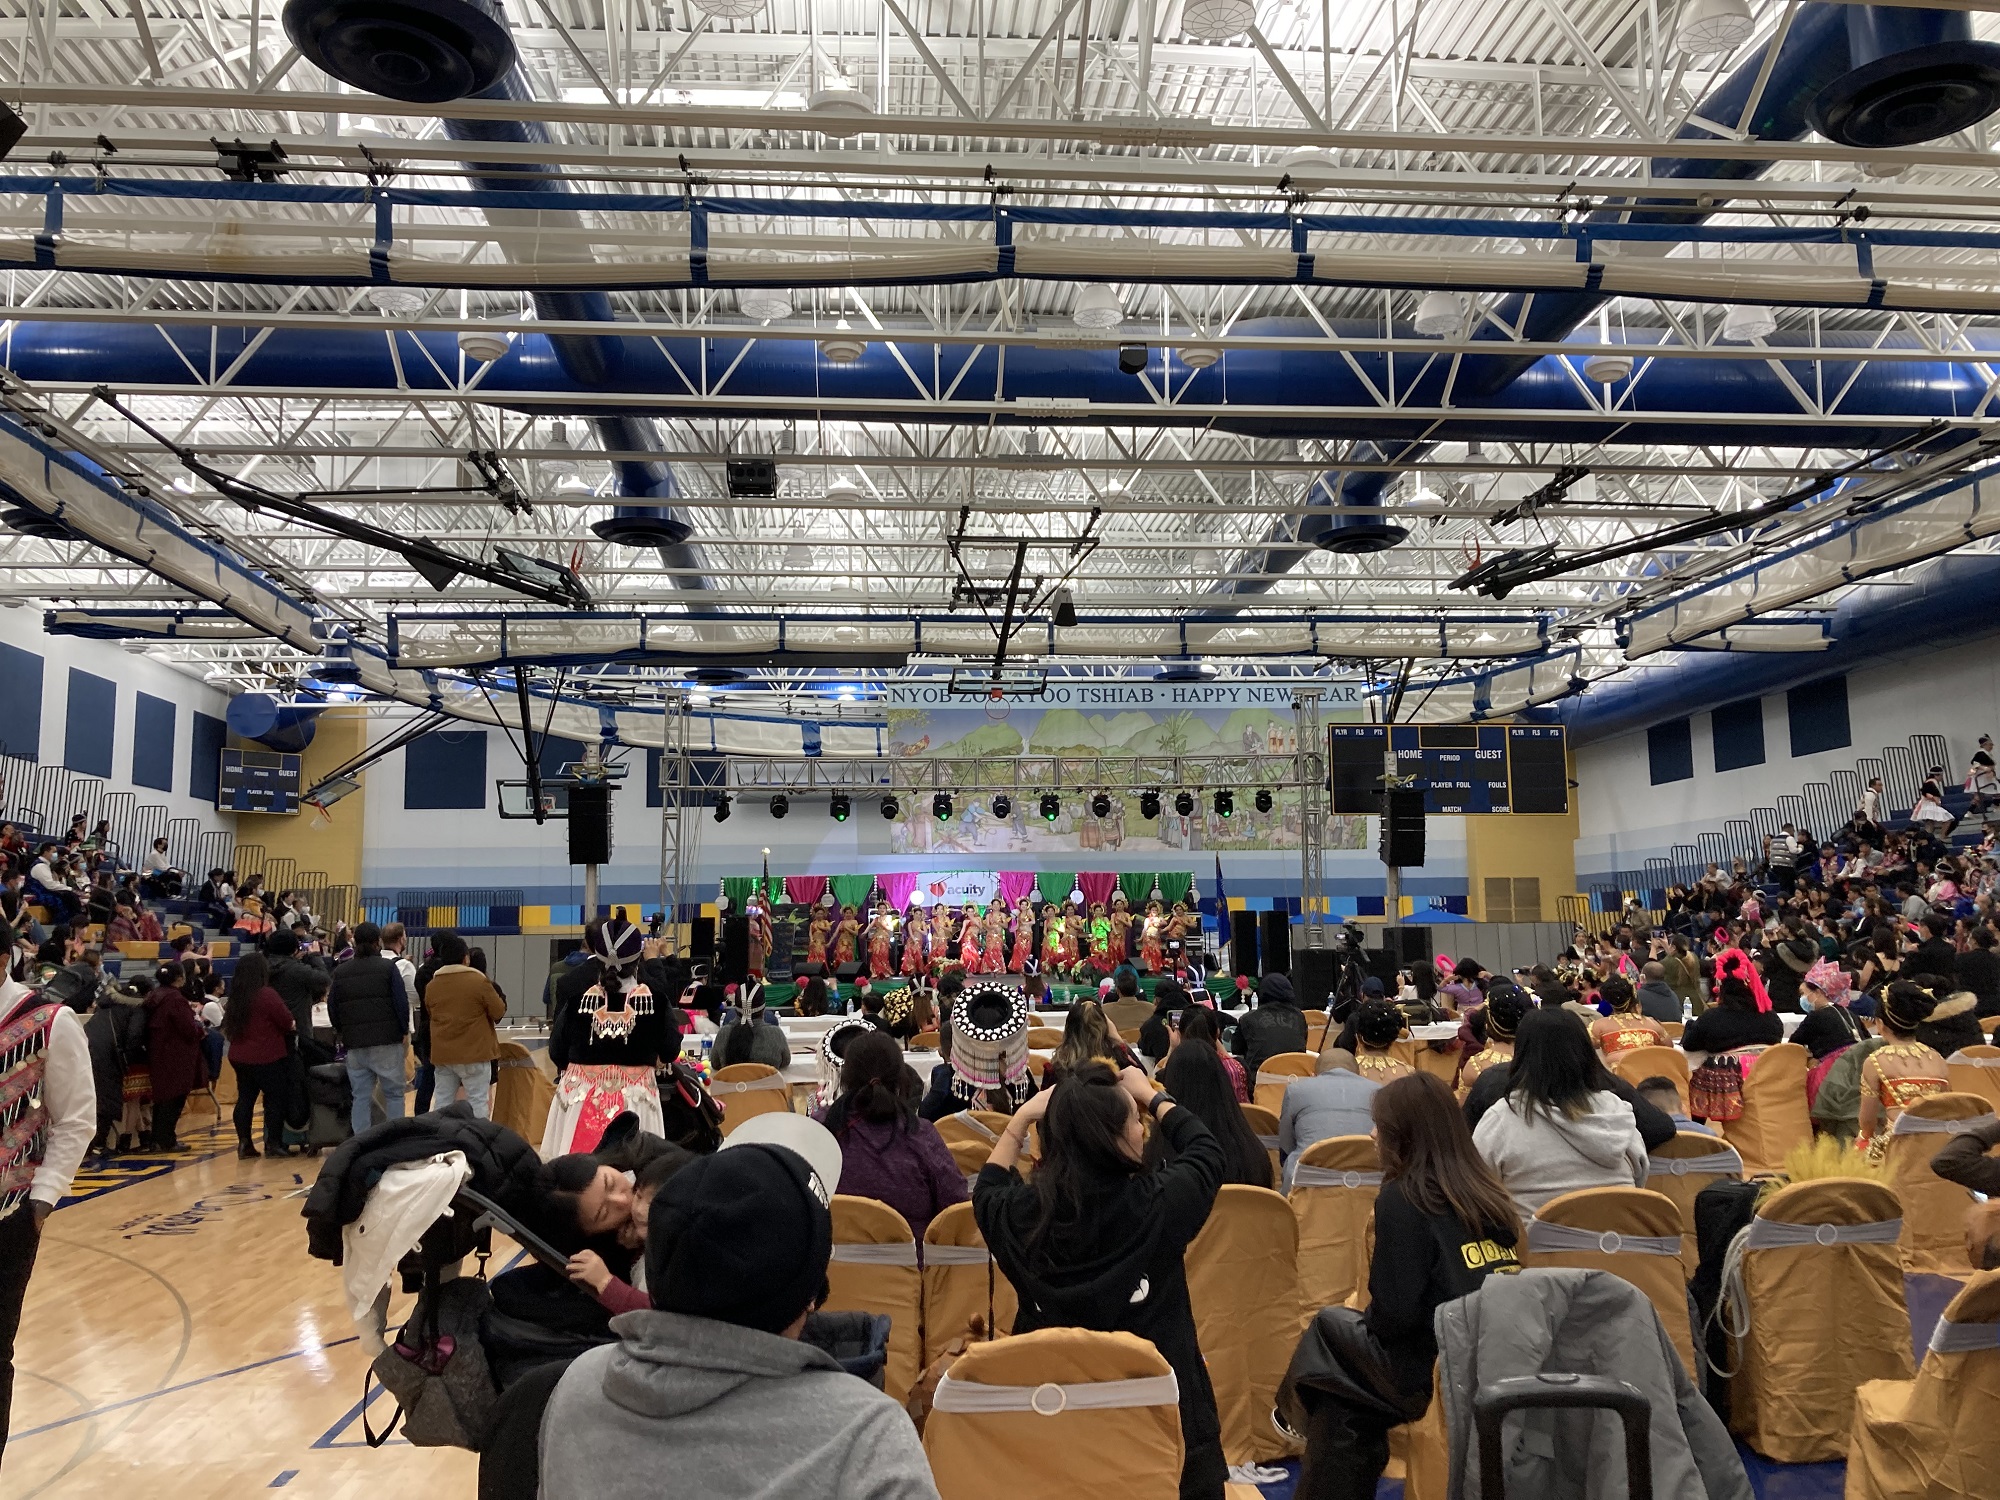 Festival goers packed the Sheboygan North High School gym for Hmong New Year on November 27, 2021. (Photo by Nkaujoua Xiong)